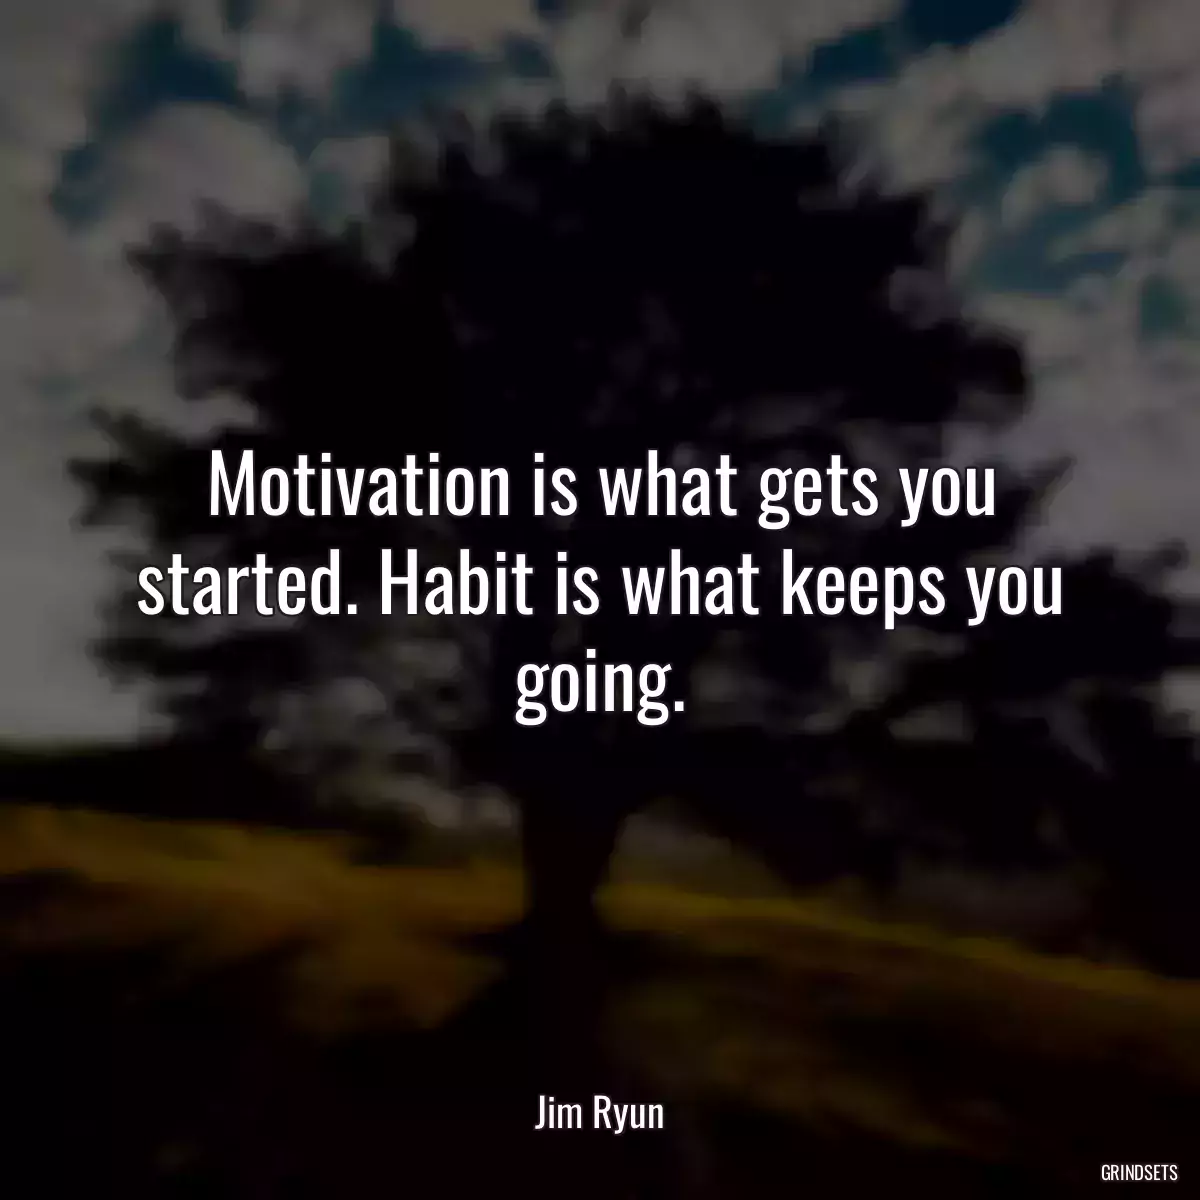 Motivation is what gets you started. Habit is what keeps you going.